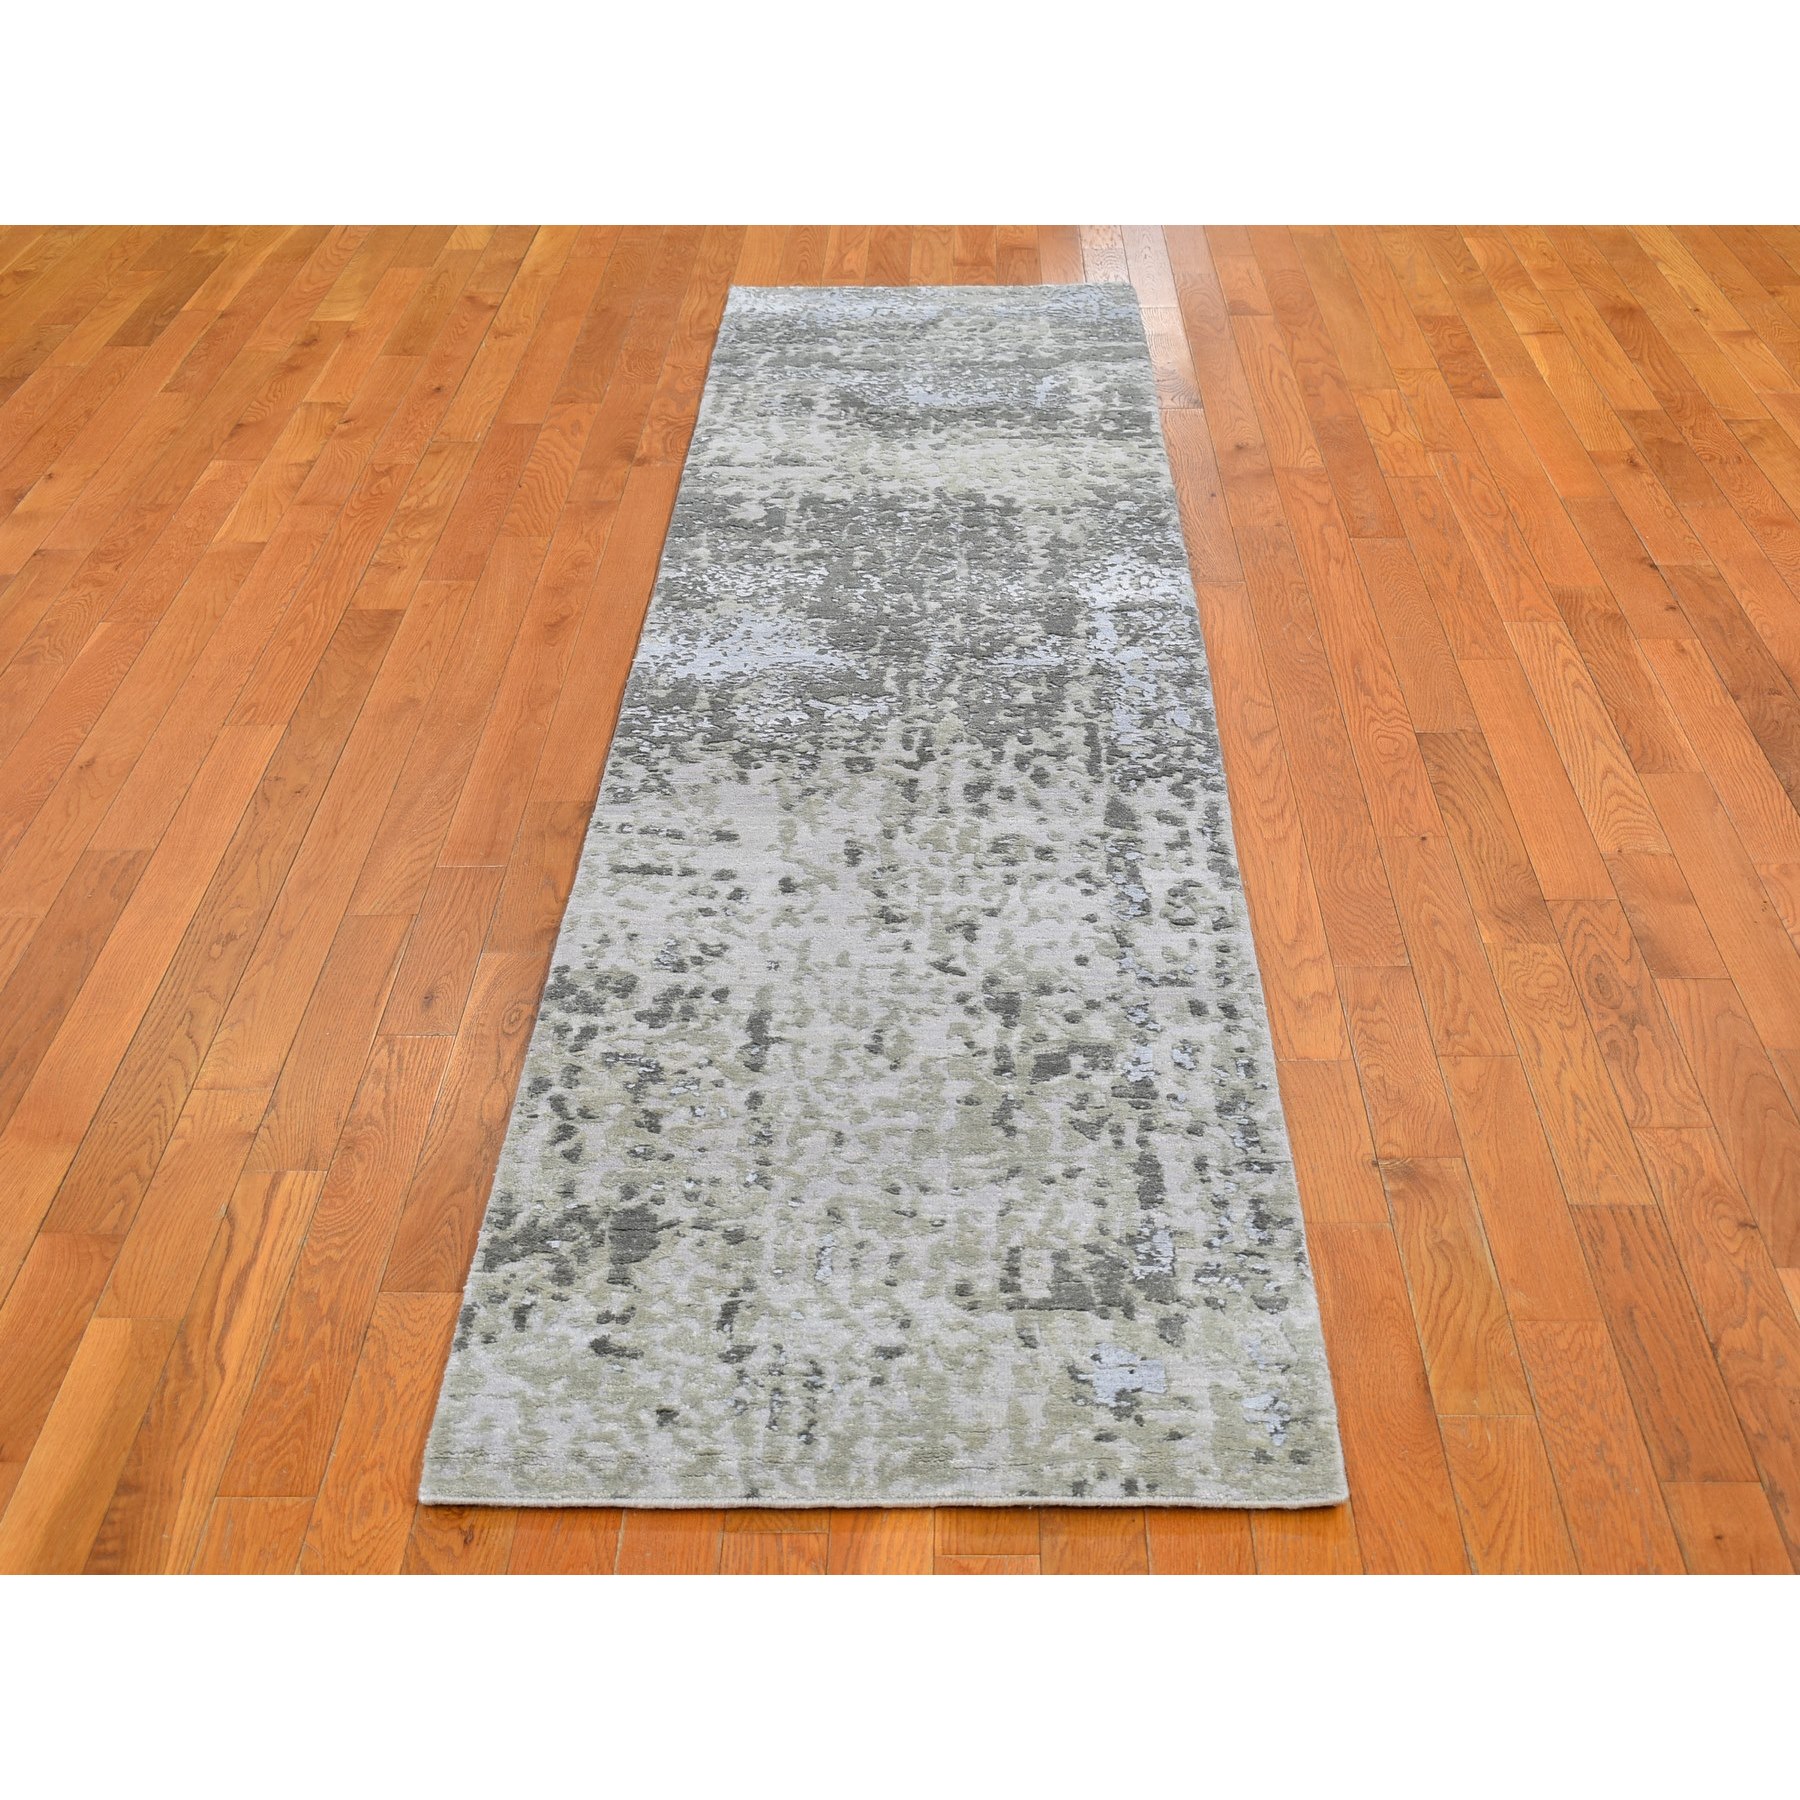 2'5"x10'3" Denser Weave Persian Knot with Abstract Design Wool and Silk Gray Hand Woven Runner Oriental Rug 